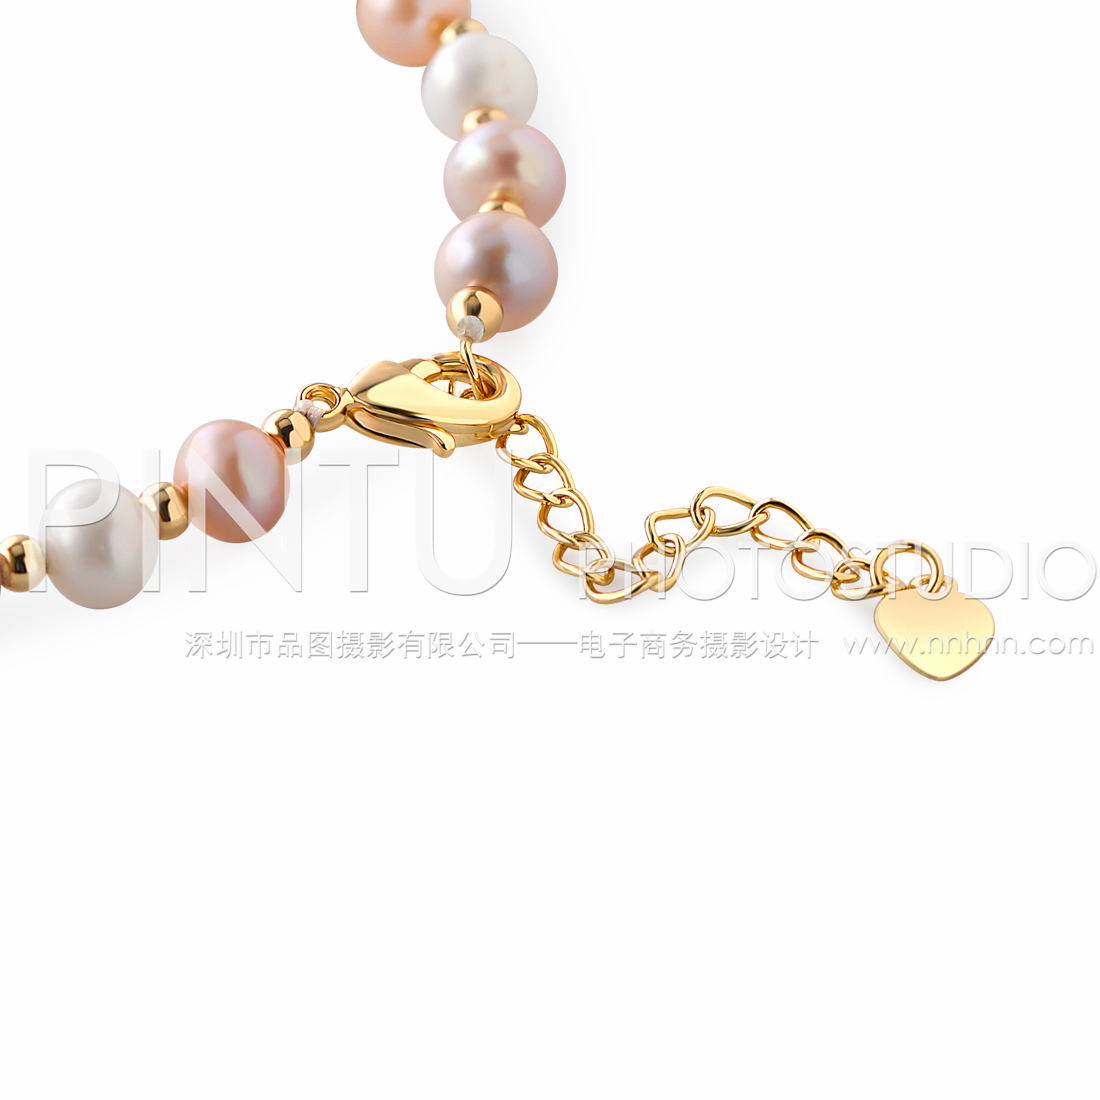 Photography bracelet for fashion jewelry products in China Close-up 3